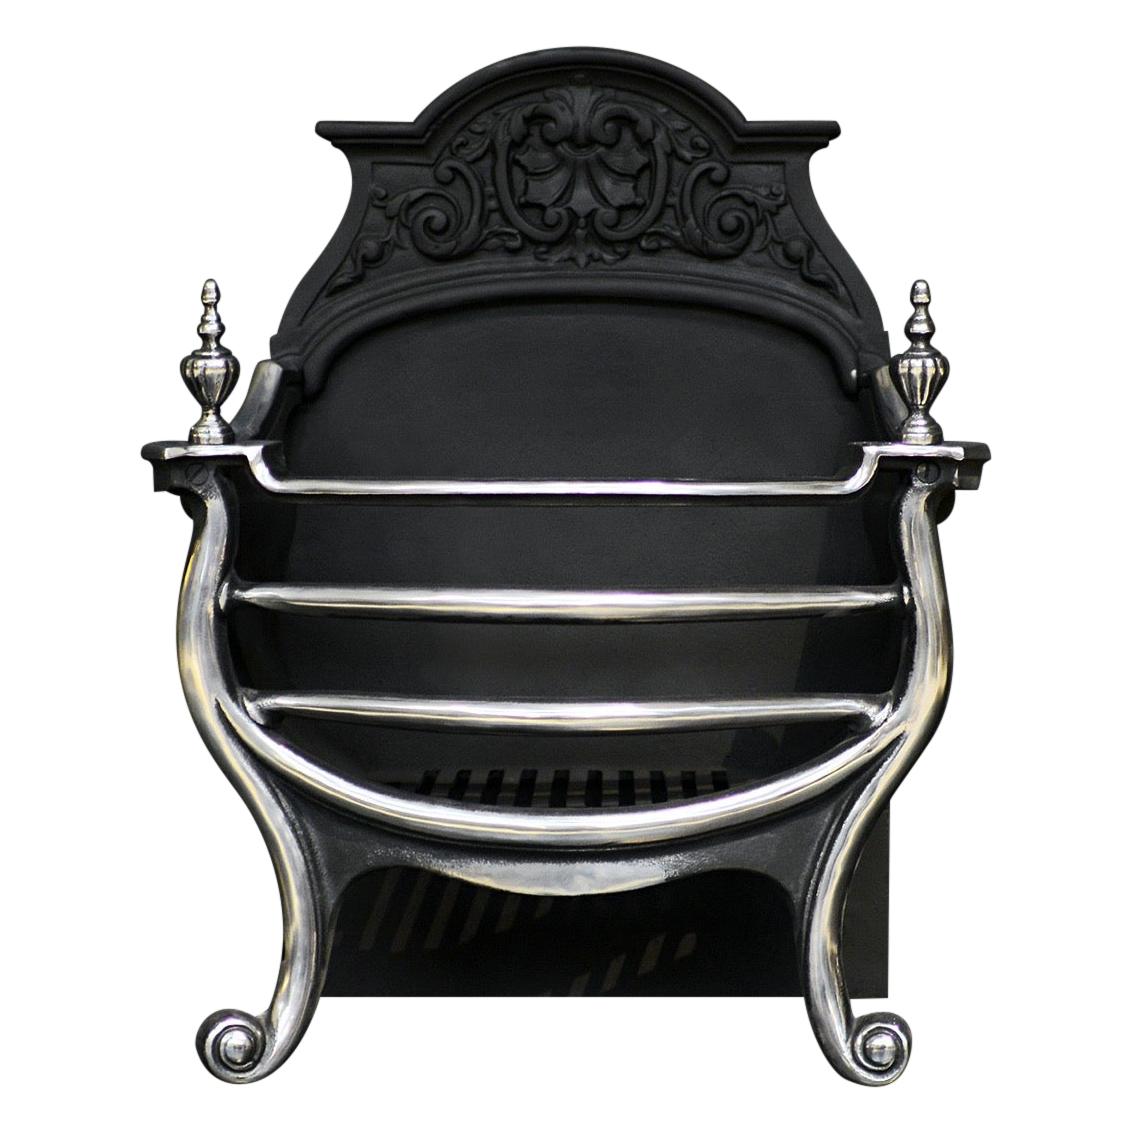 Polished Cast Iron Firegrate For Sale